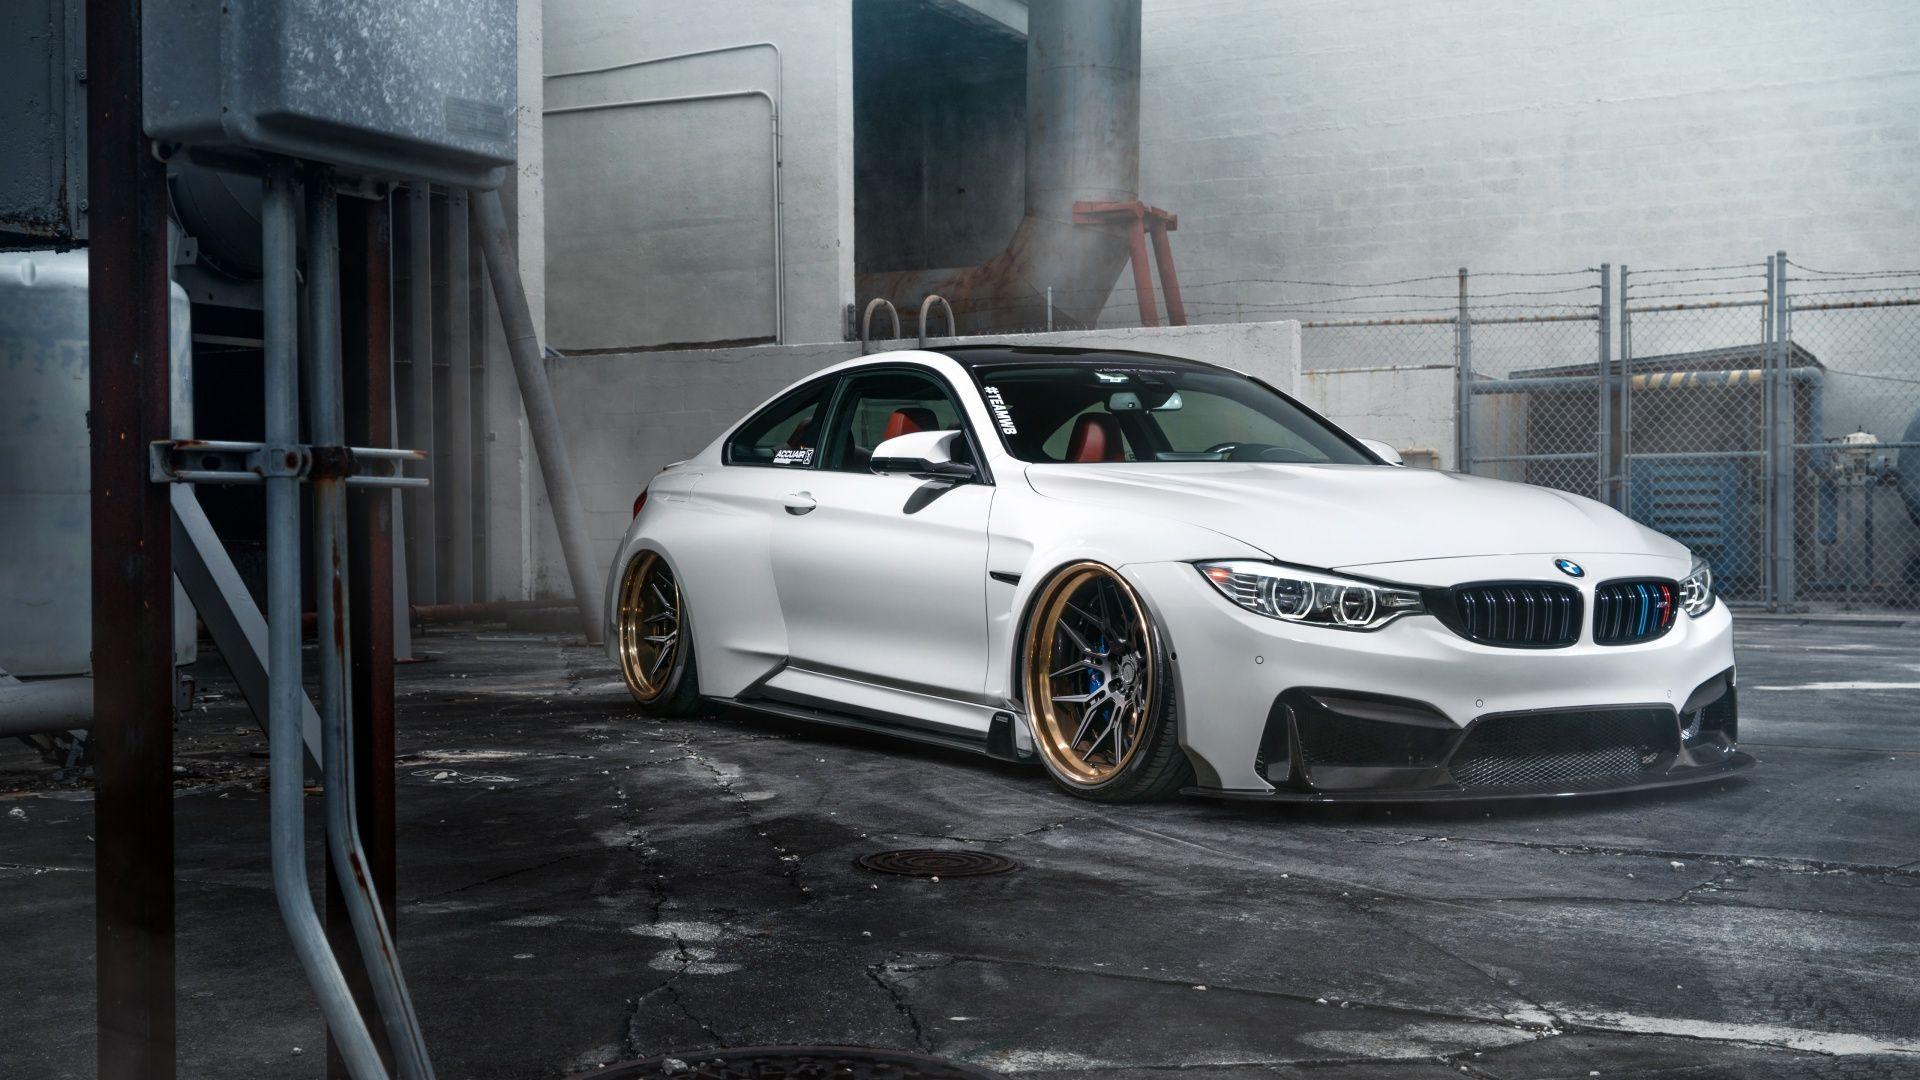 ADV1 BMW M4 Wallpaper in jpg format for free download